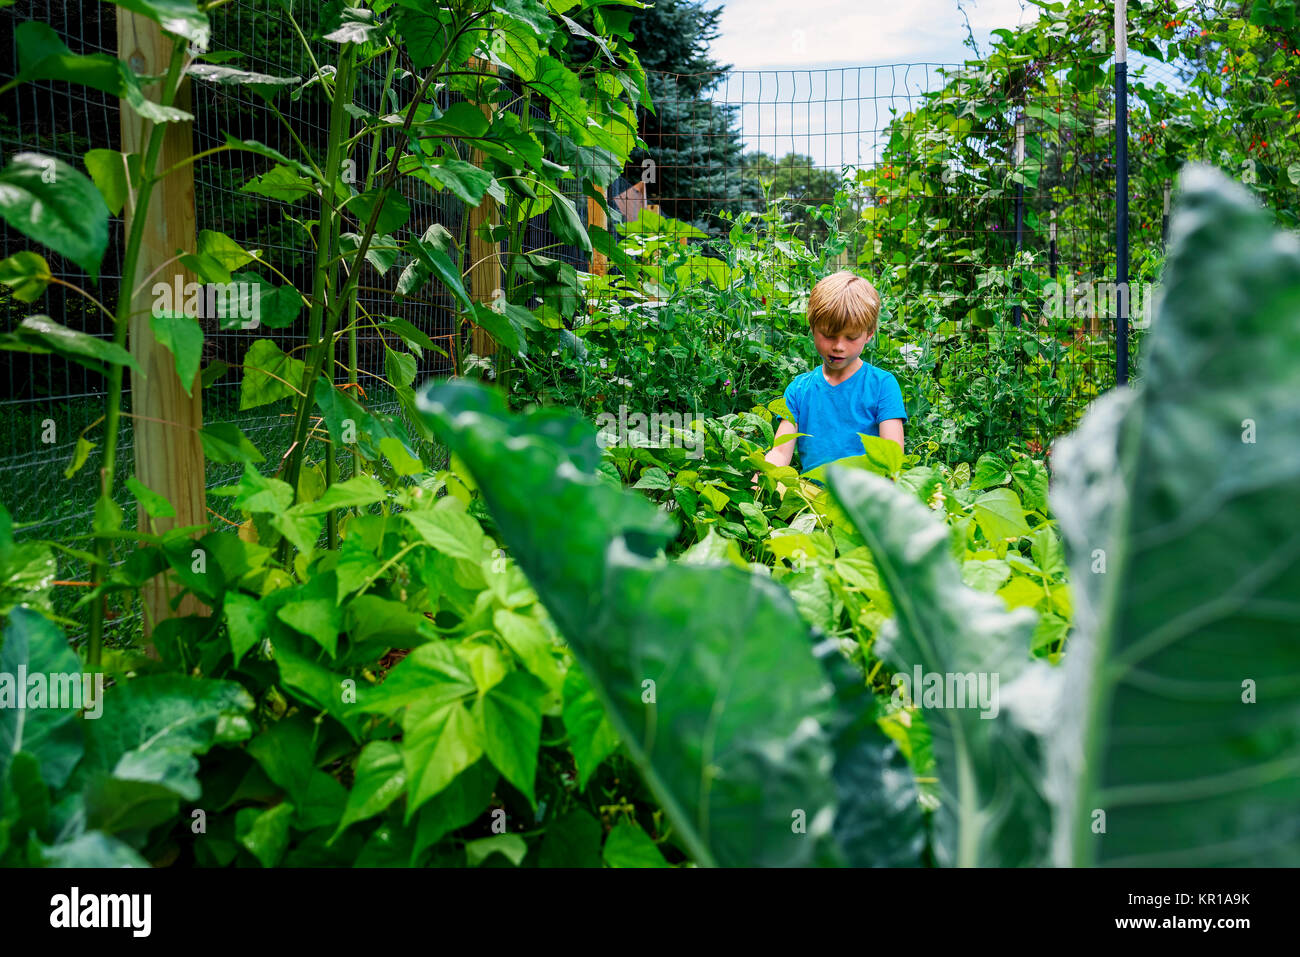 Boy in a vegetable patch picking vegetables Stock Photo